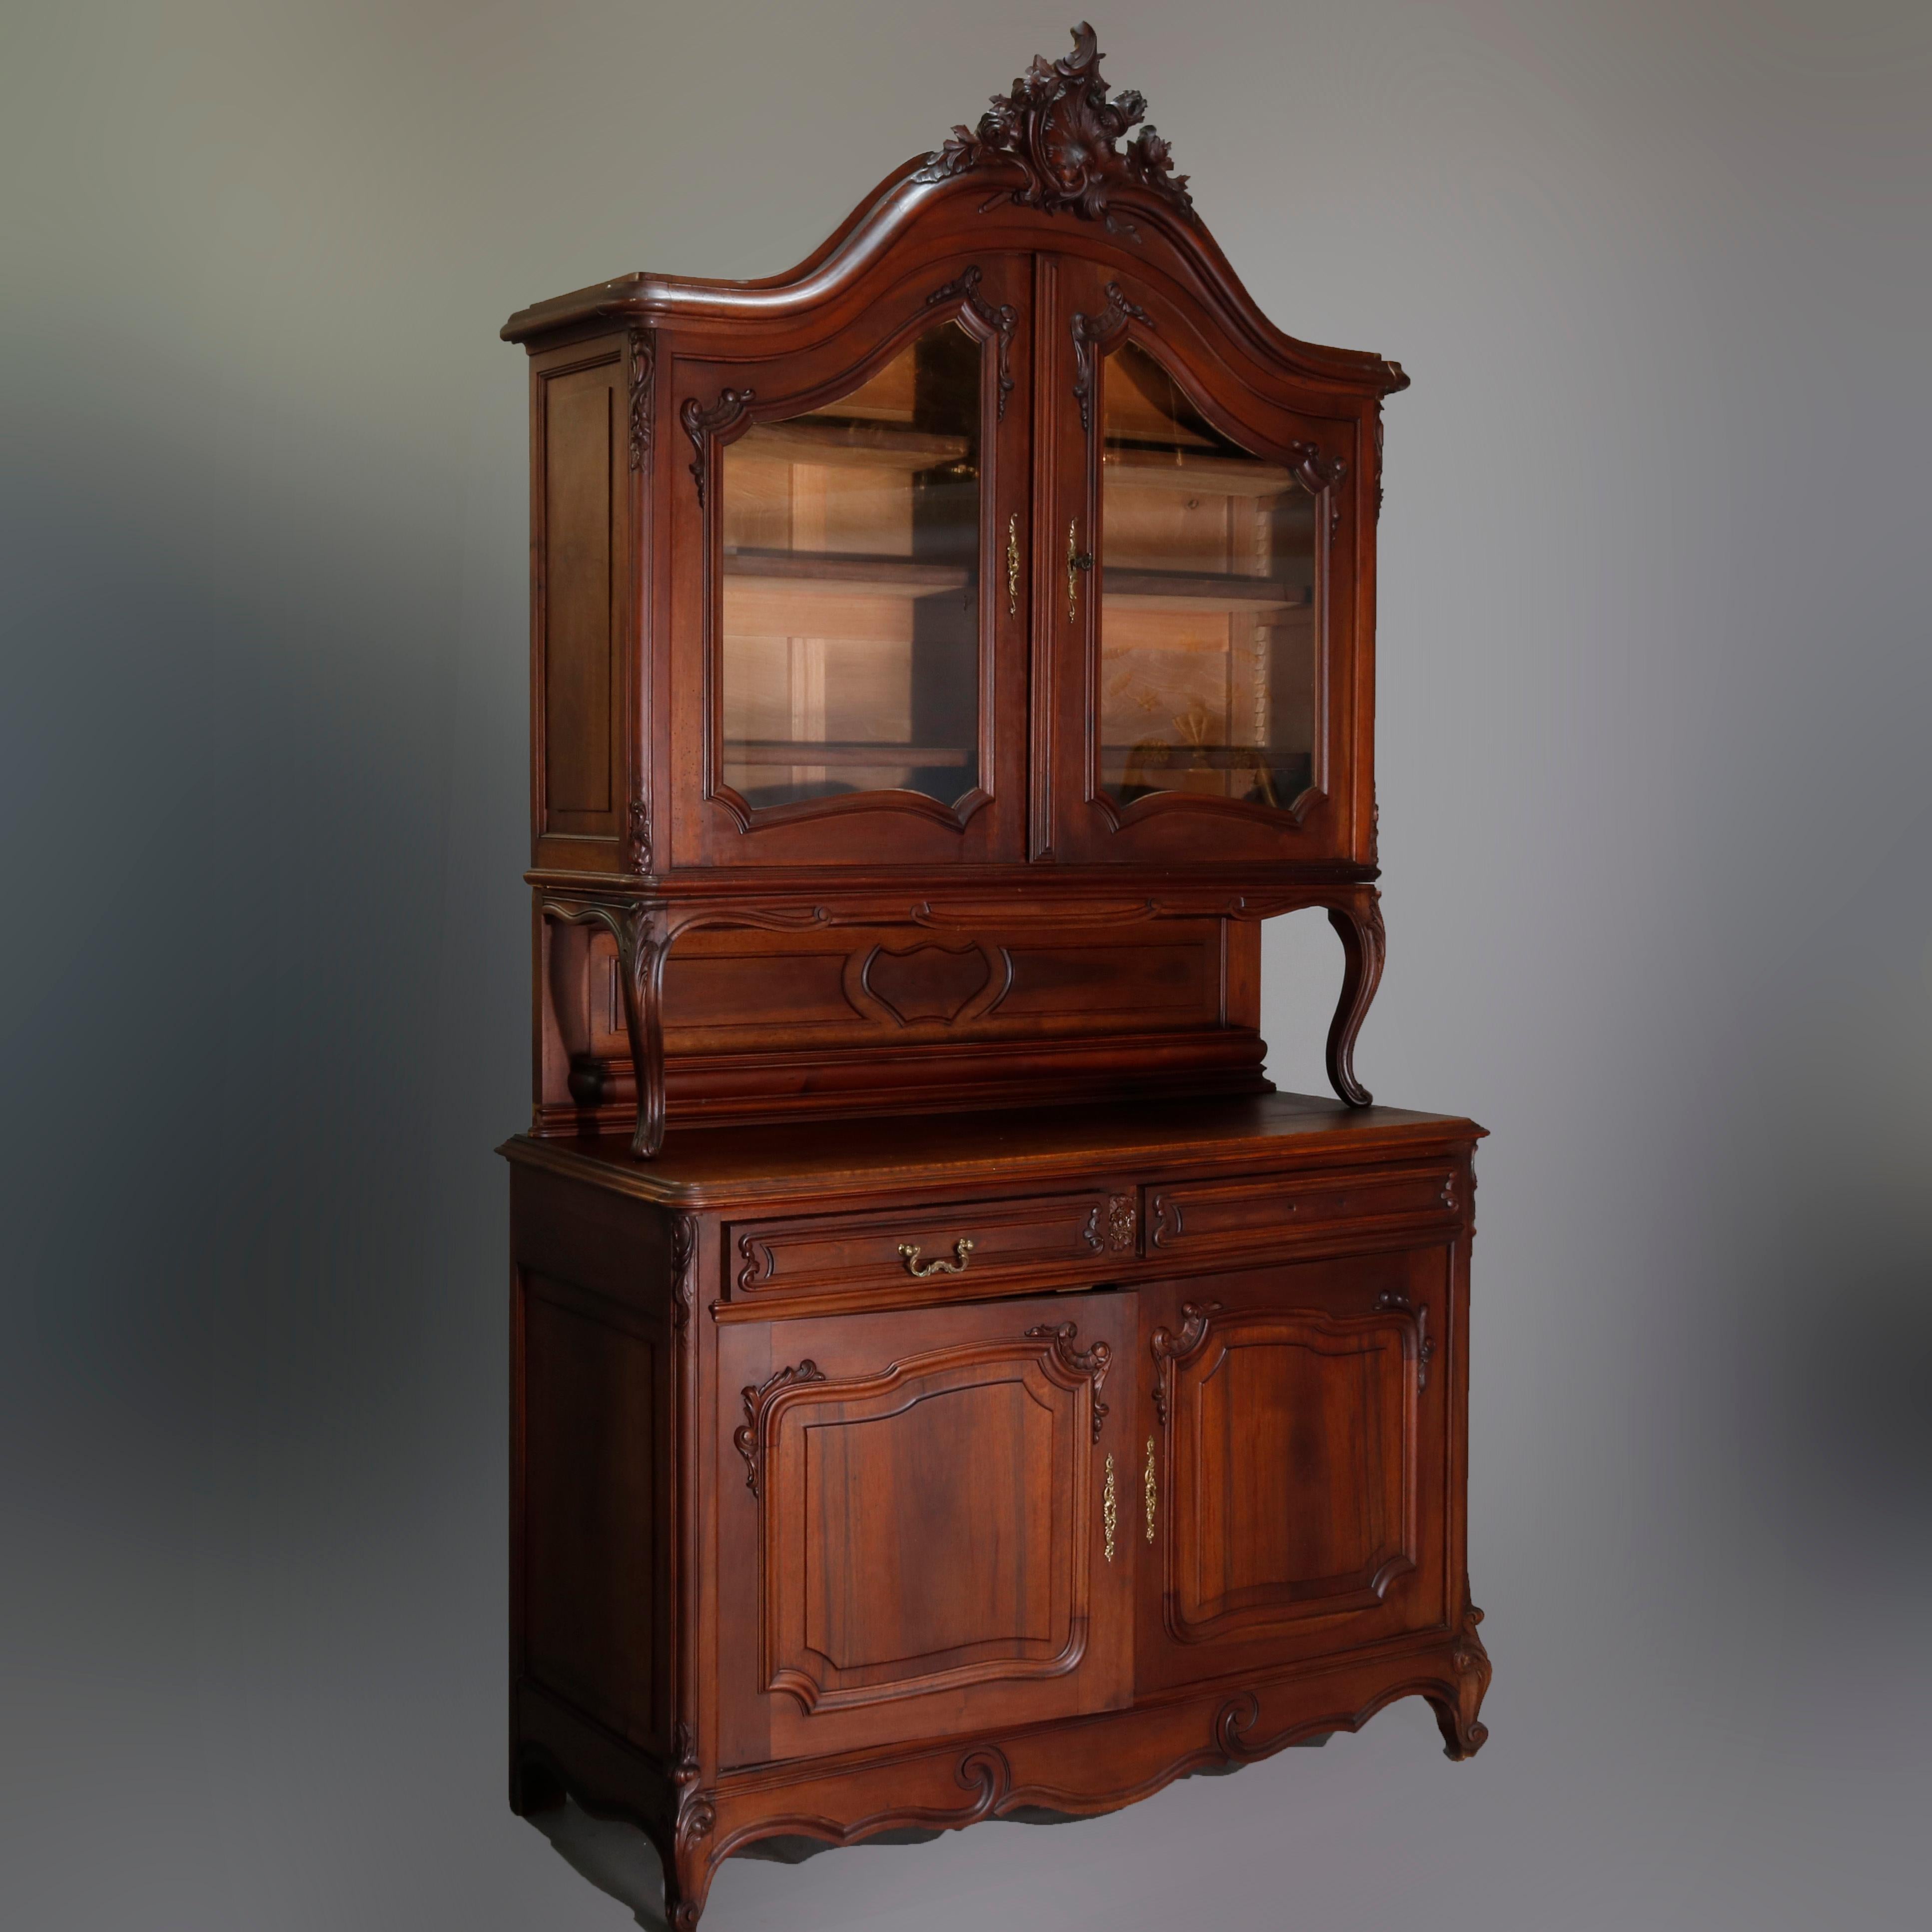 Antique French Rococo carved walnut step back hunt cupboard with arched and asymmetrical foliate and shell carved crest with torch flame surmounting double arched glass door upper with scrolled elements over lower with double drawers and raised